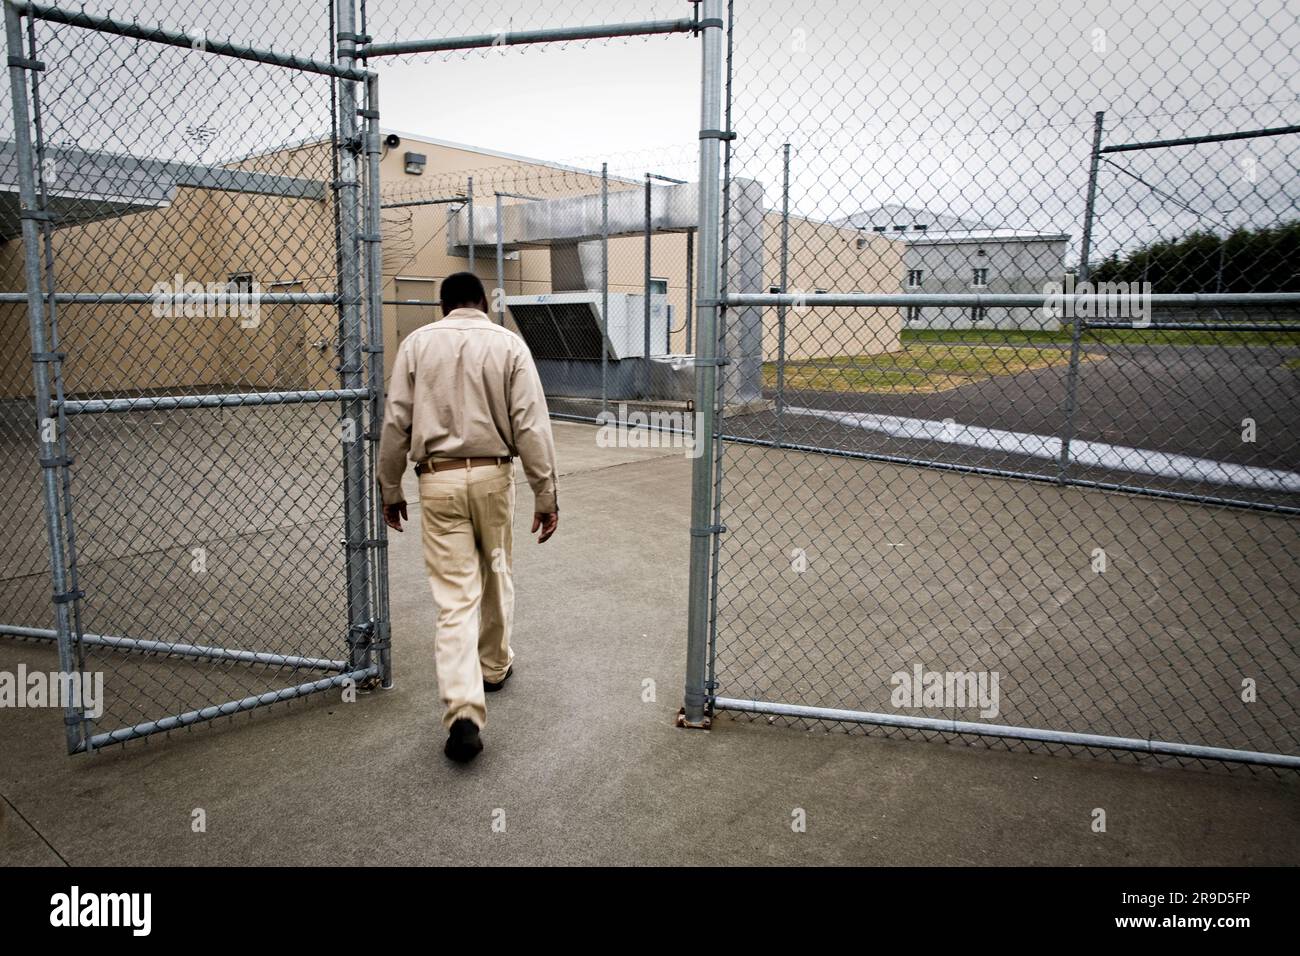 Inmate returns to cell. Stock Photo